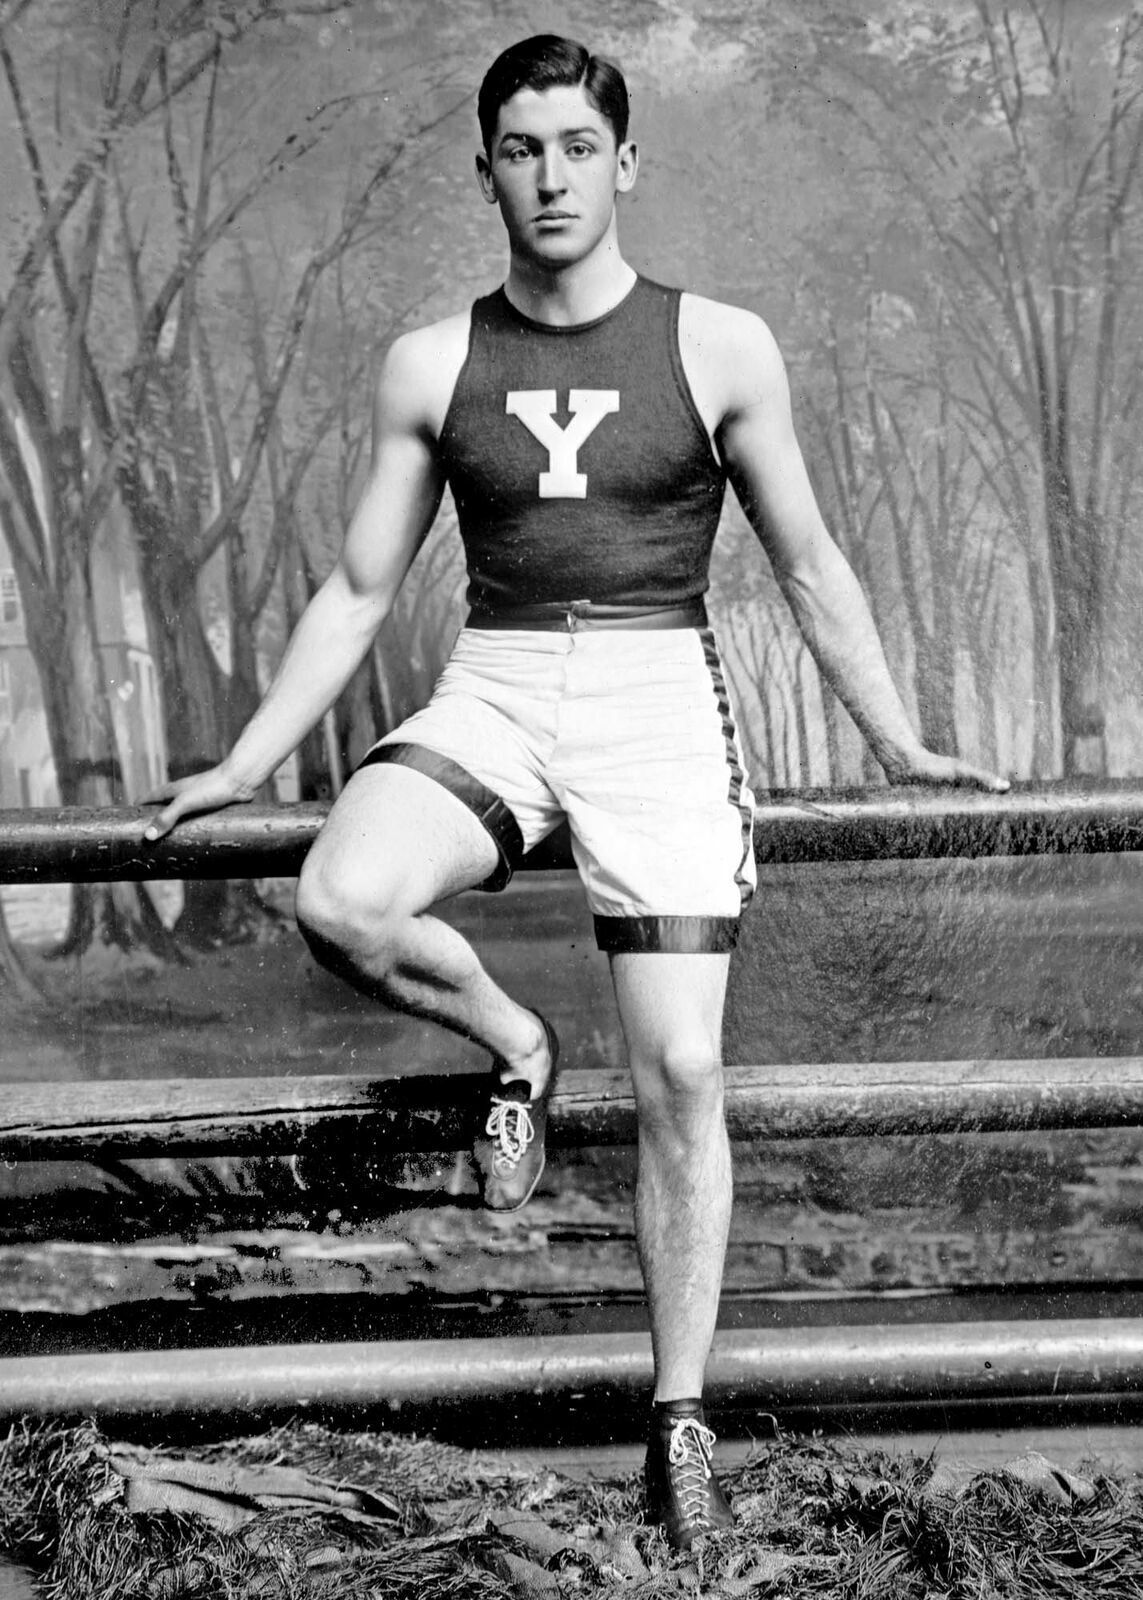 1908 Captain Dray Yale Relay Team Vintage Old Athlete Photo 11